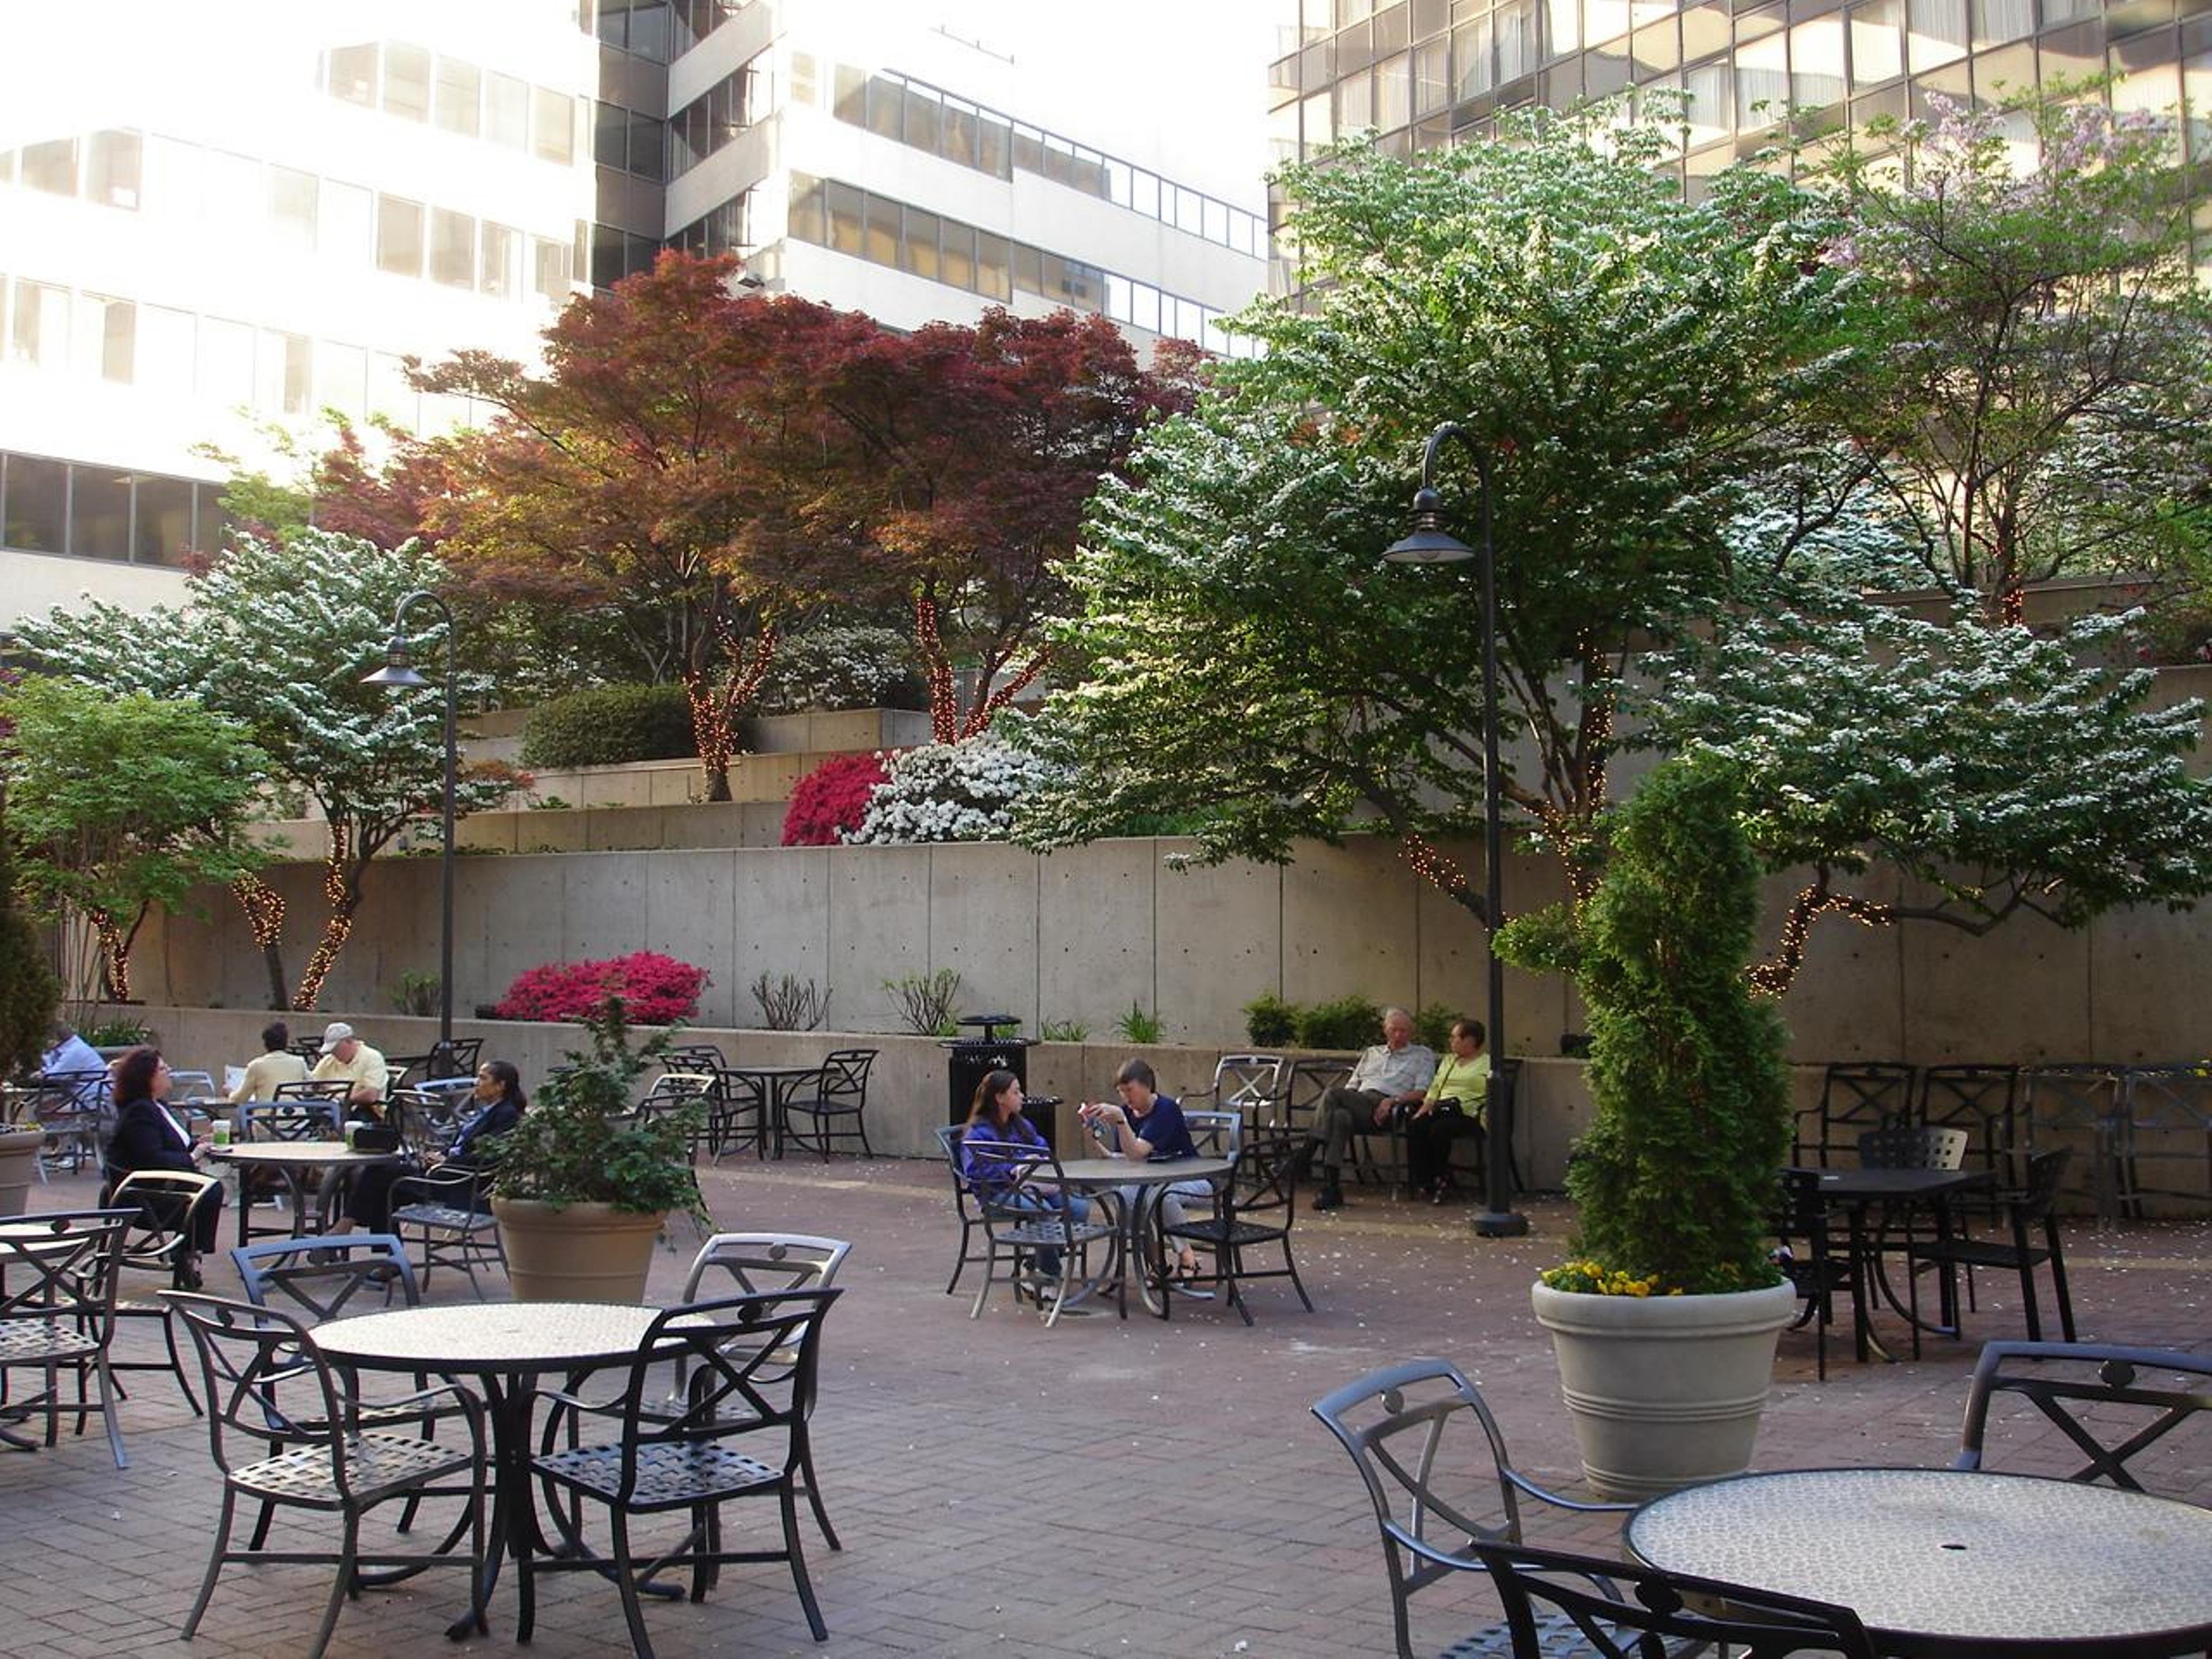 Enjoy lunch and drinks in the courtyard area.